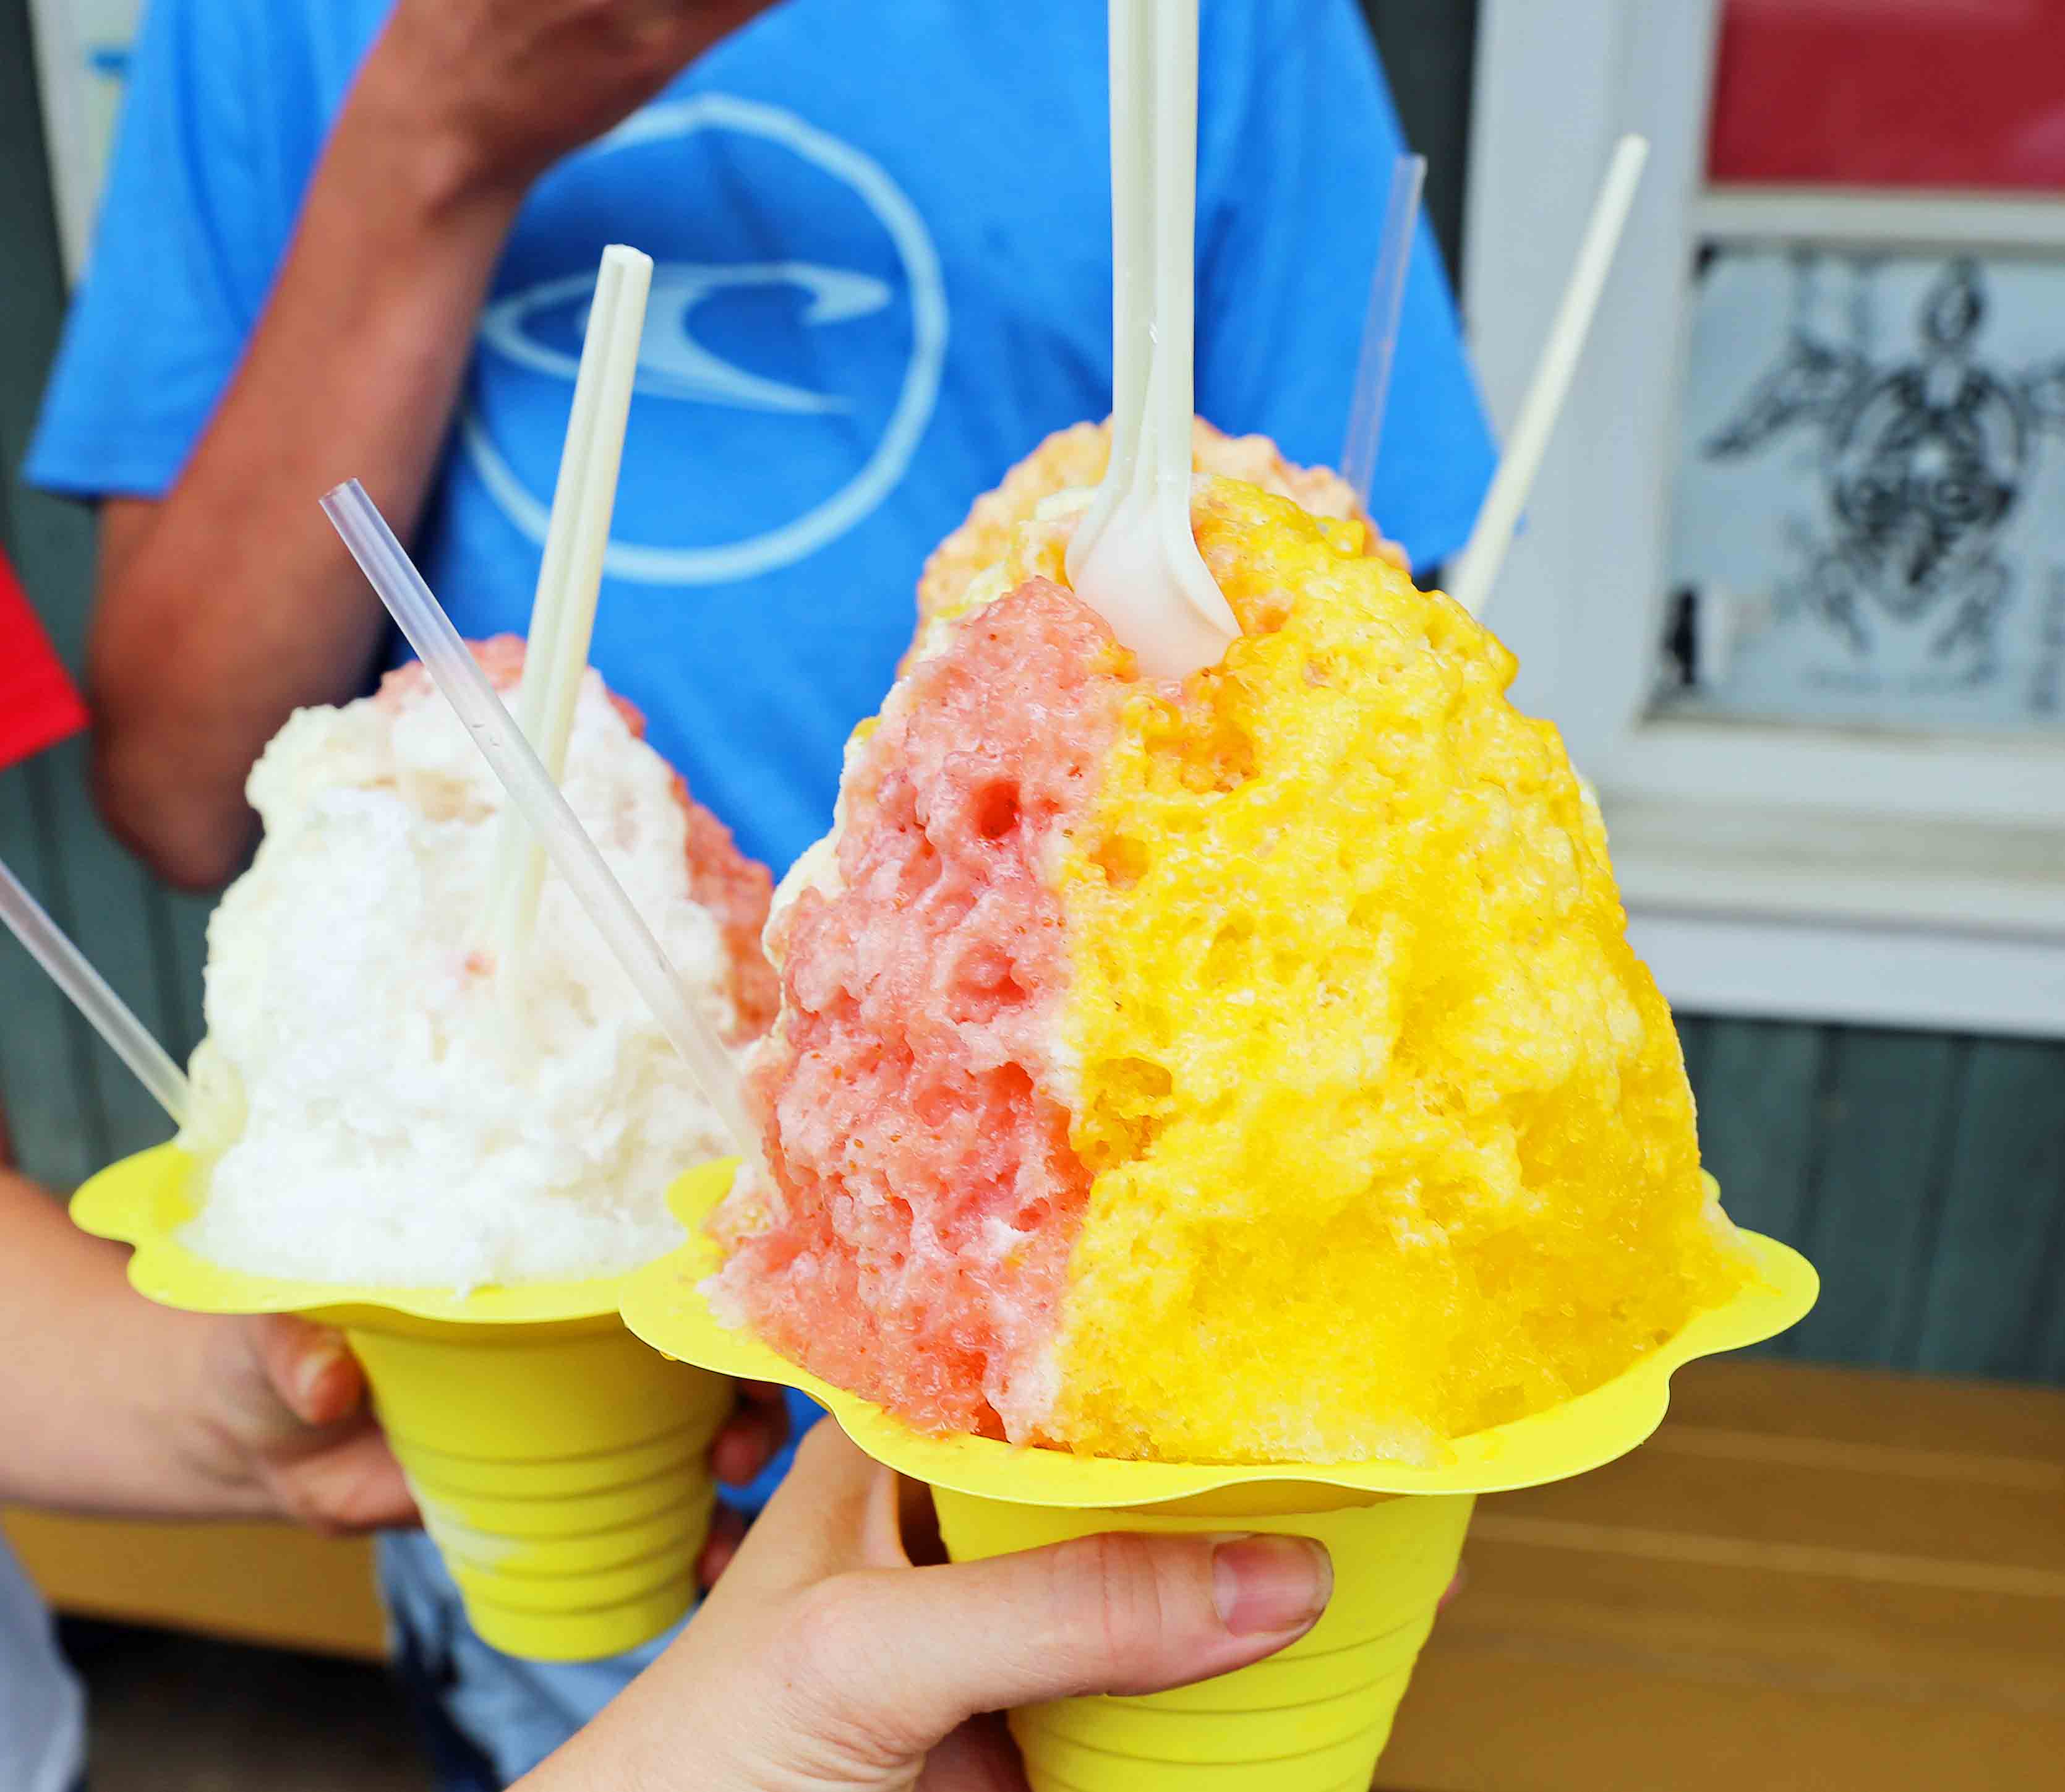 Kauai Hawaii Travel Guide. Hee Fat General Store Shave Ice